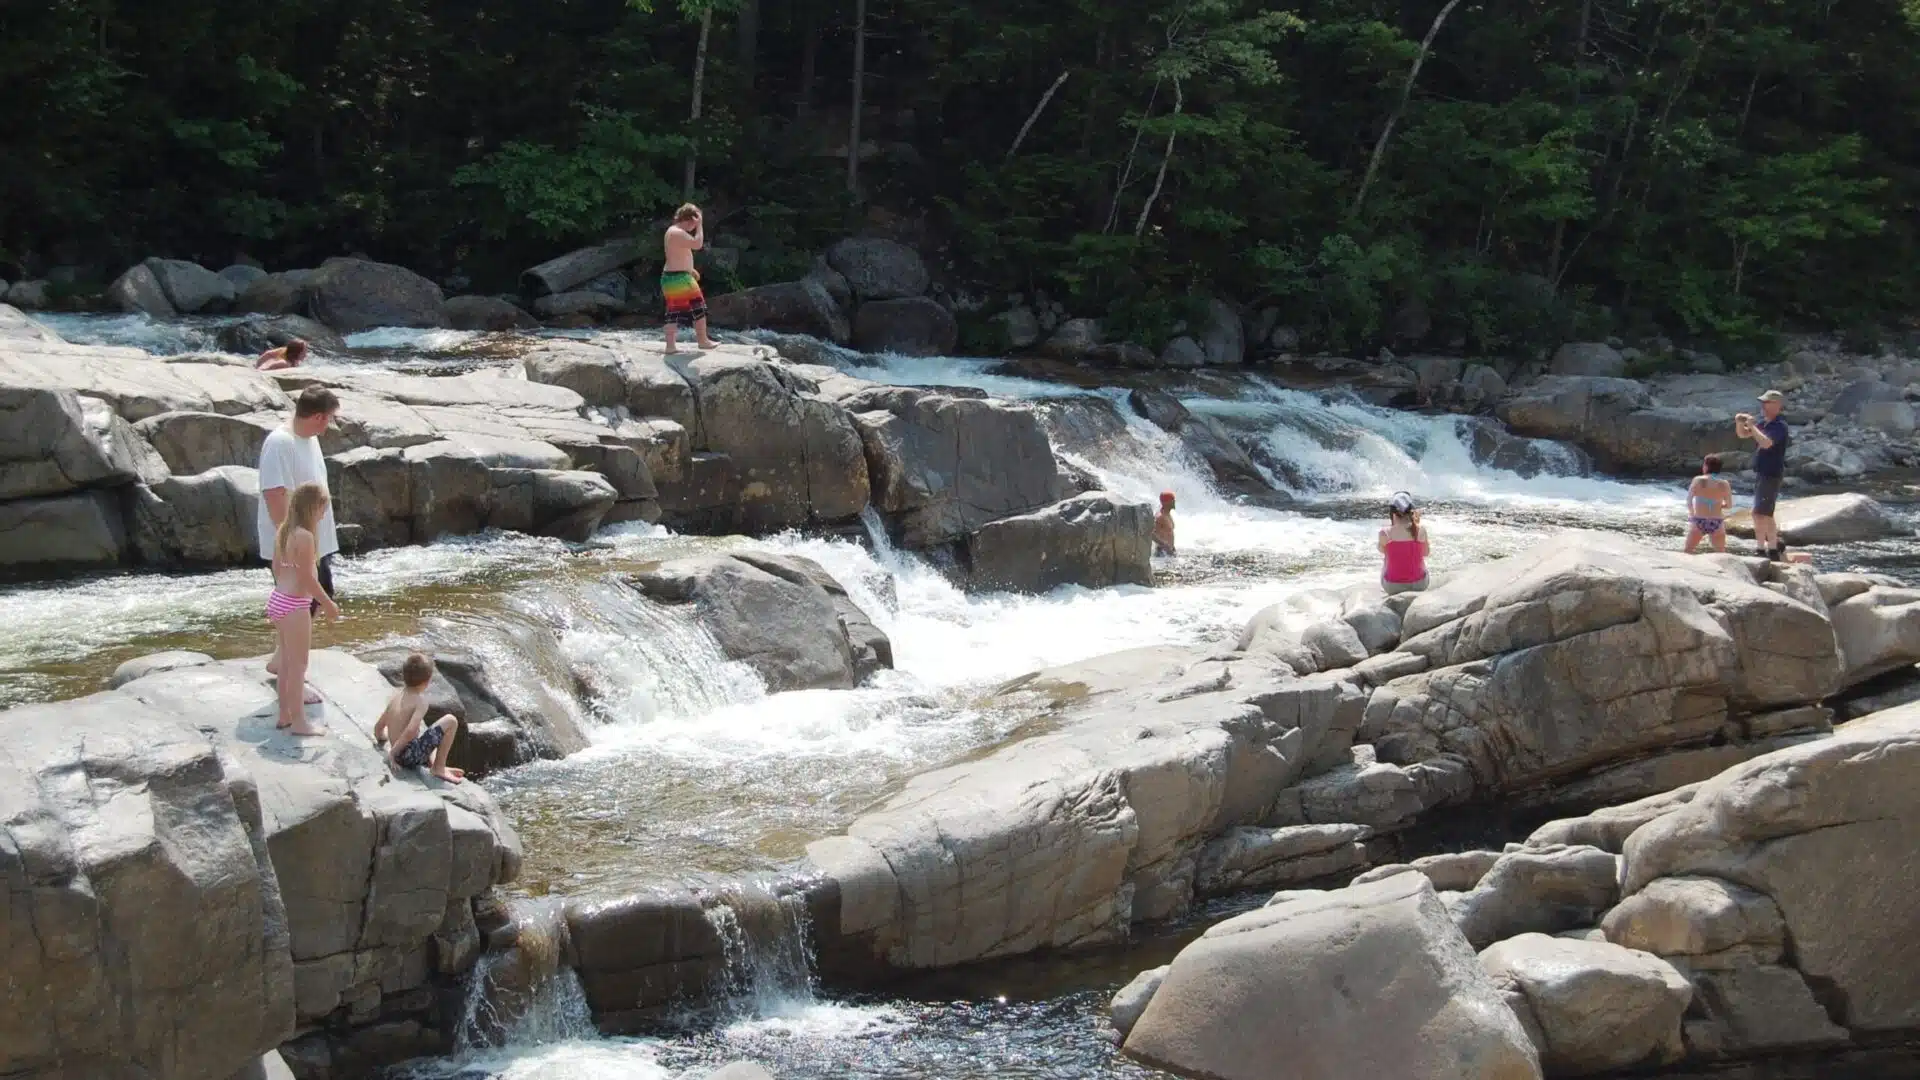 people on the rocks at a Swimming Holes in the White Mountains New Hampshire|rushing water at the swimming holes in Vermont and White Mountains New Hampshire|people enjoying the Swimming holes waterfalls in Franconia New Hampshire